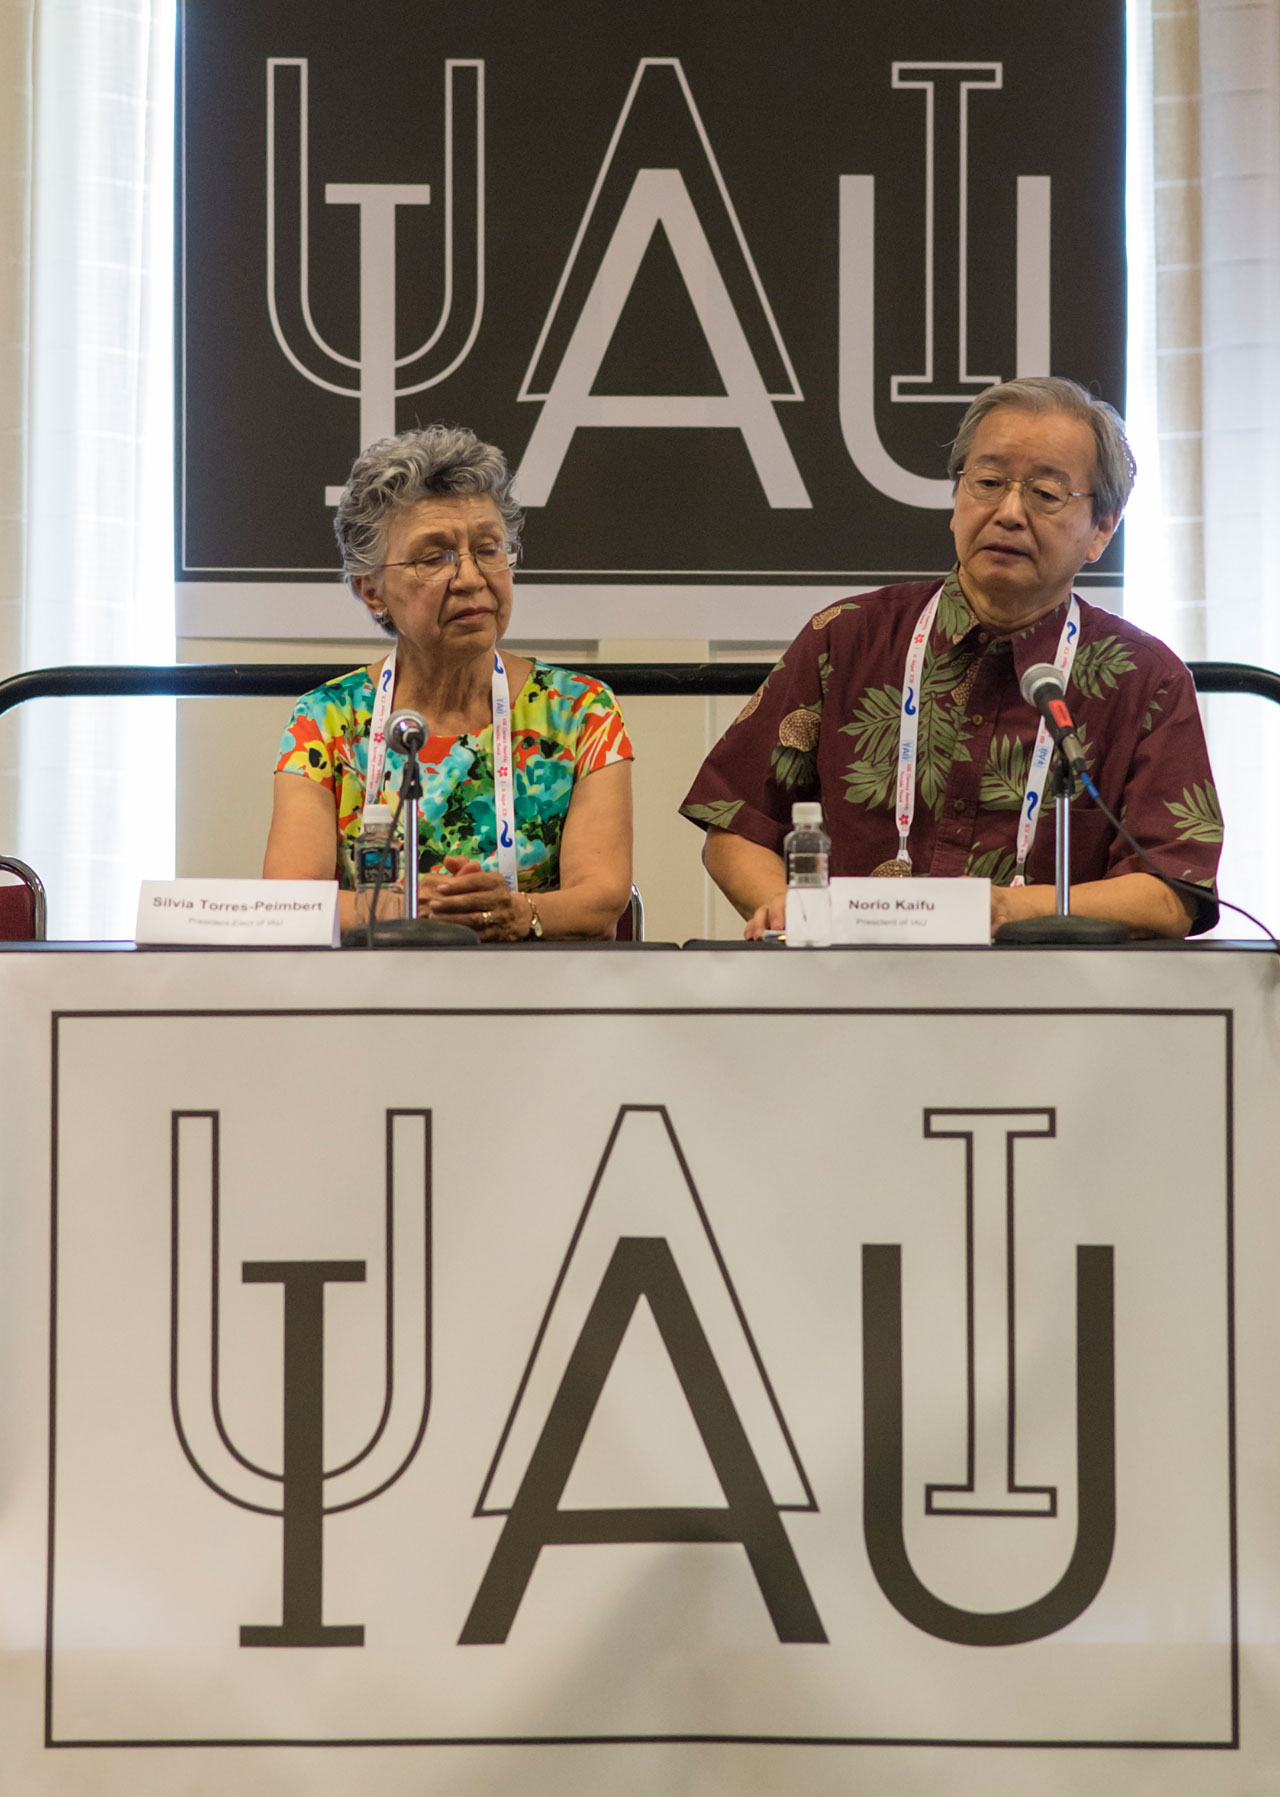 Norio Kaifu at the first press briefing of the IAU XXIX General Assembly